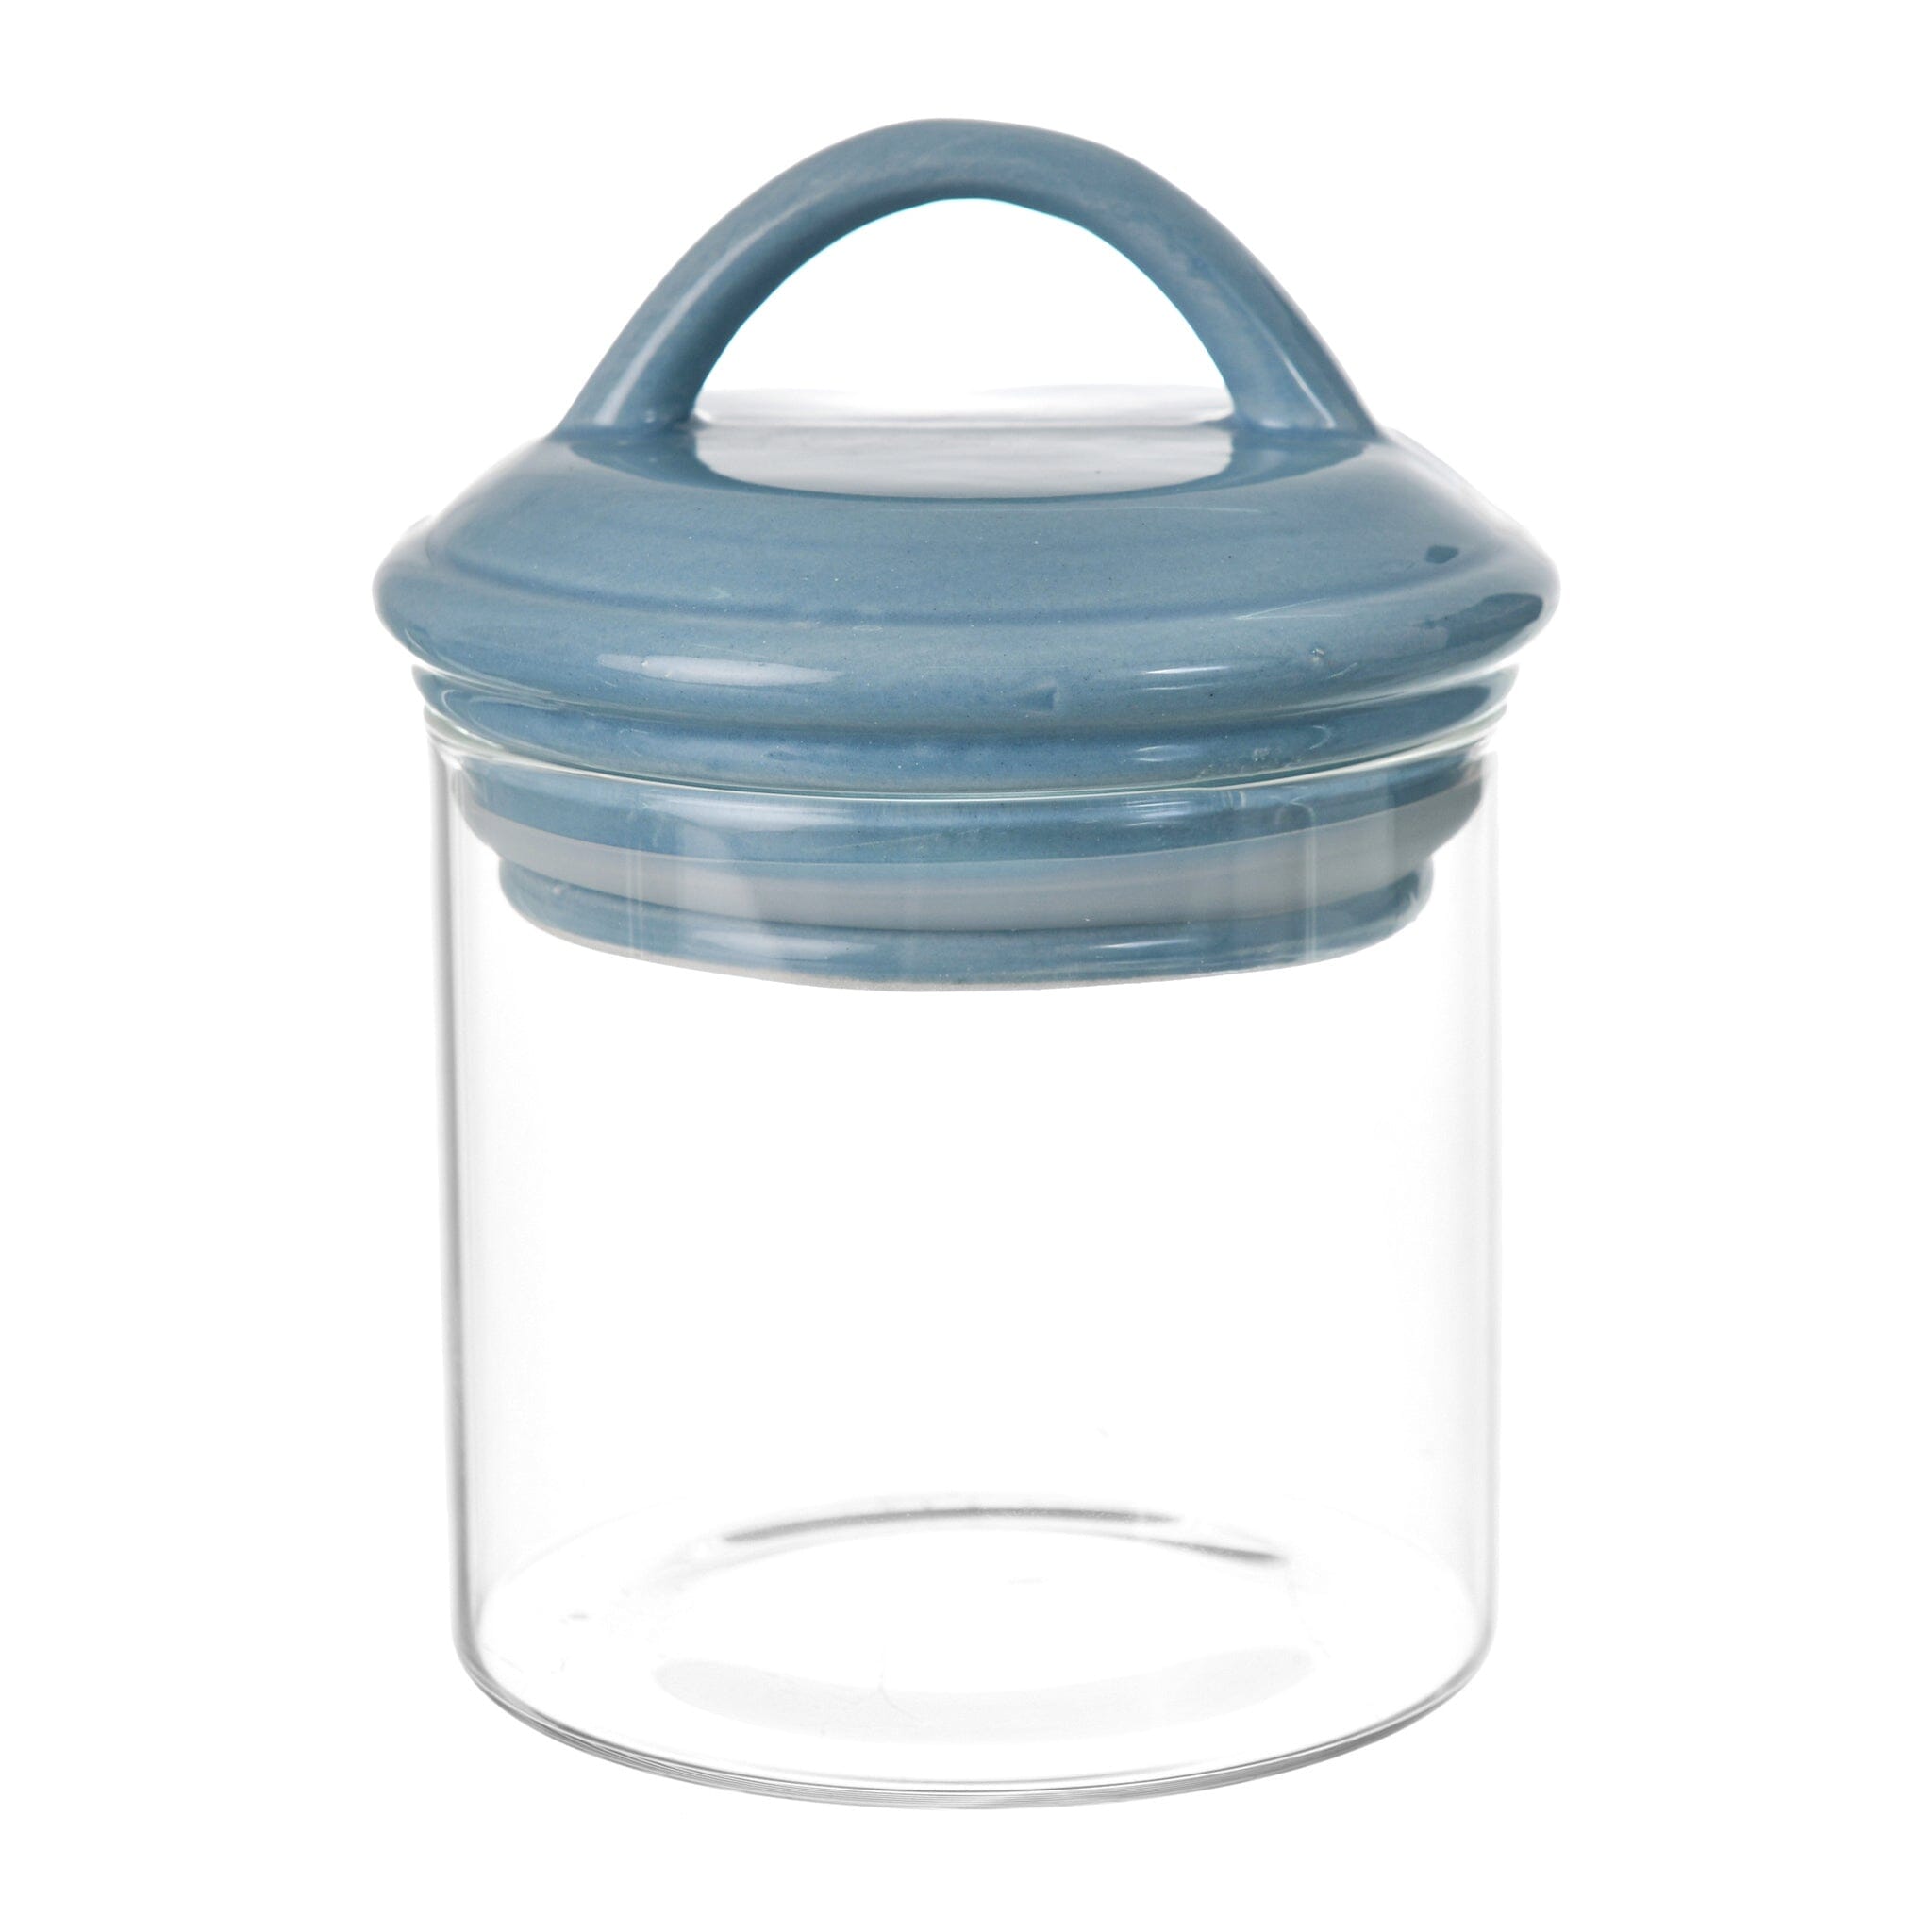 O'lala - Glass Jar with Silicone Cover - Blue - 10x9cm - 520008051